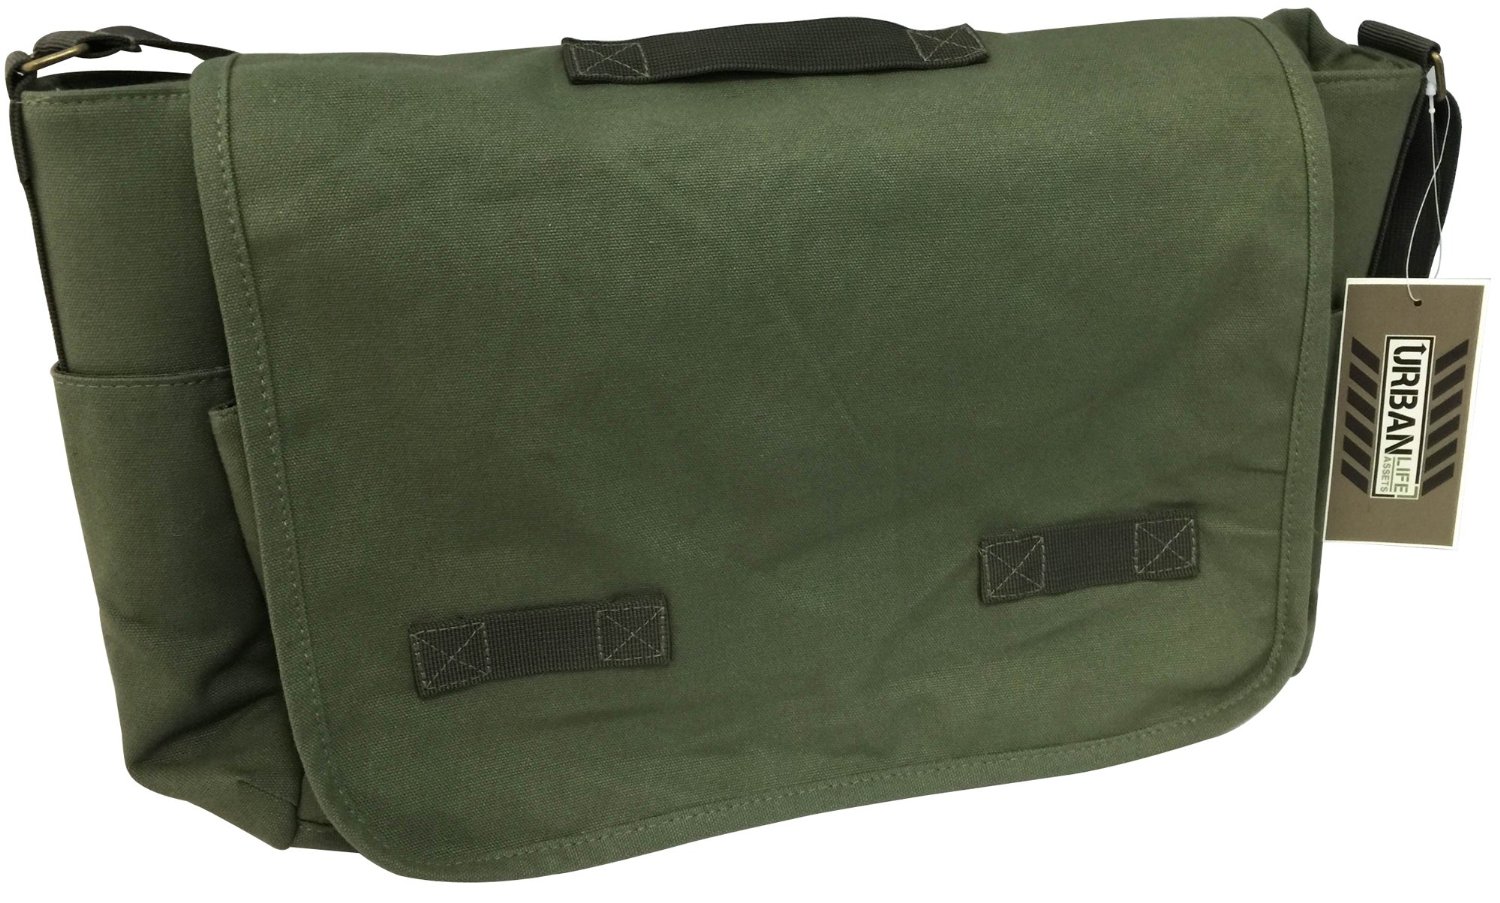 Urban Life Canvas Messenger Bag $1+ Free Shipping With Amazon Prime or $35 order - HEAVENLY STEALS